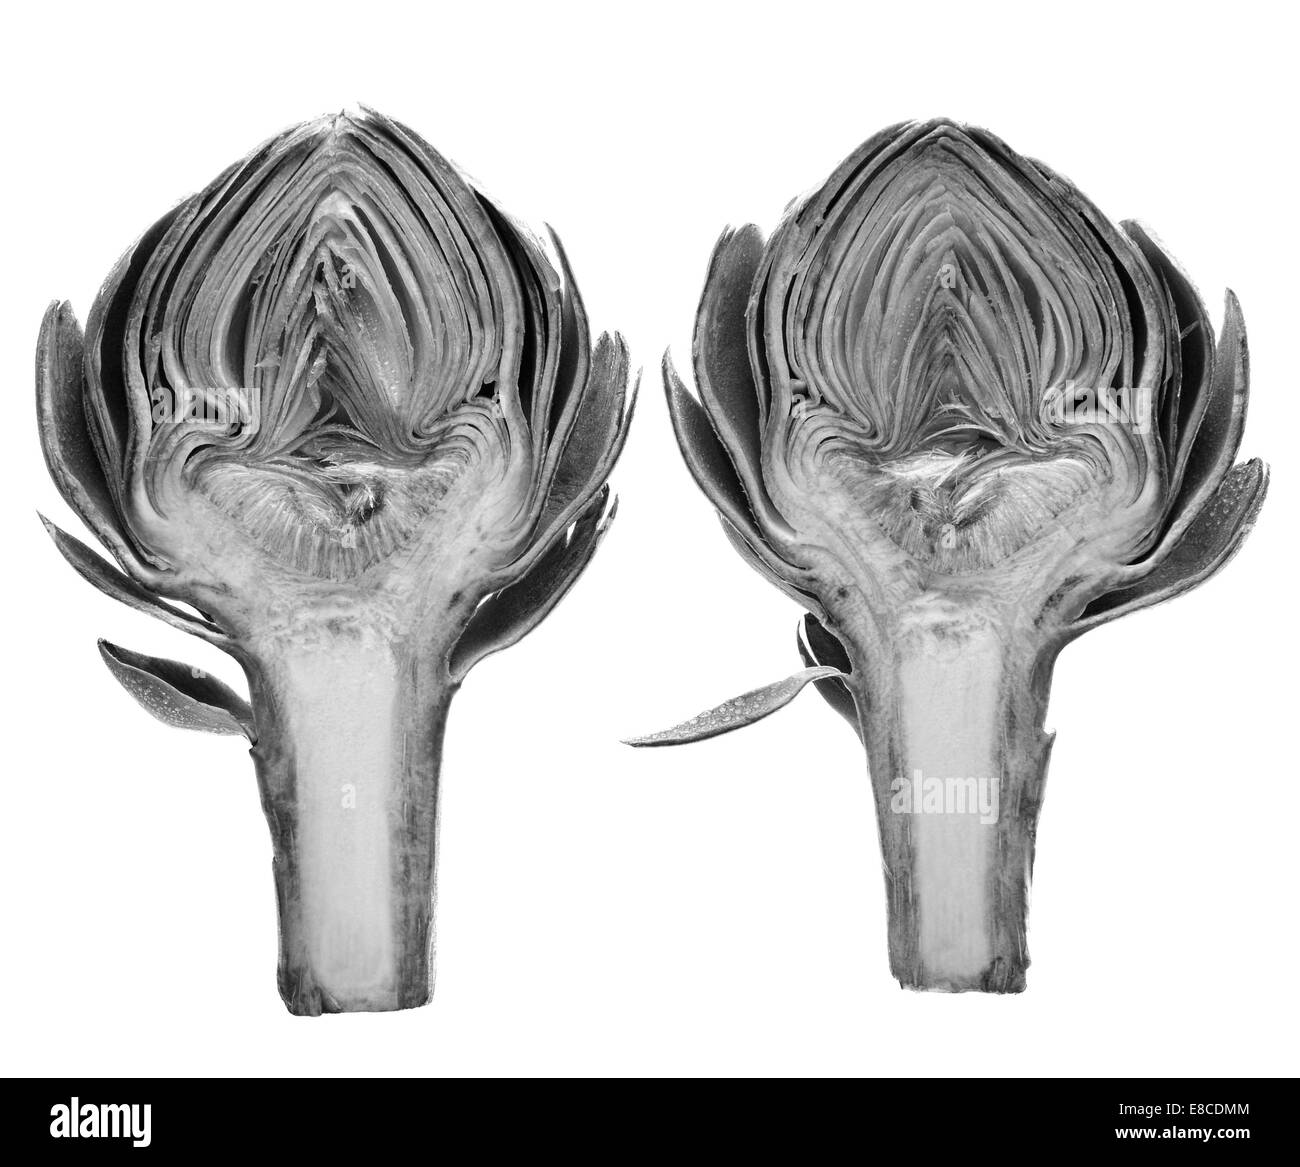 A black and white study of an artichoke cut in half. Both halves on a white background. Stock Photo